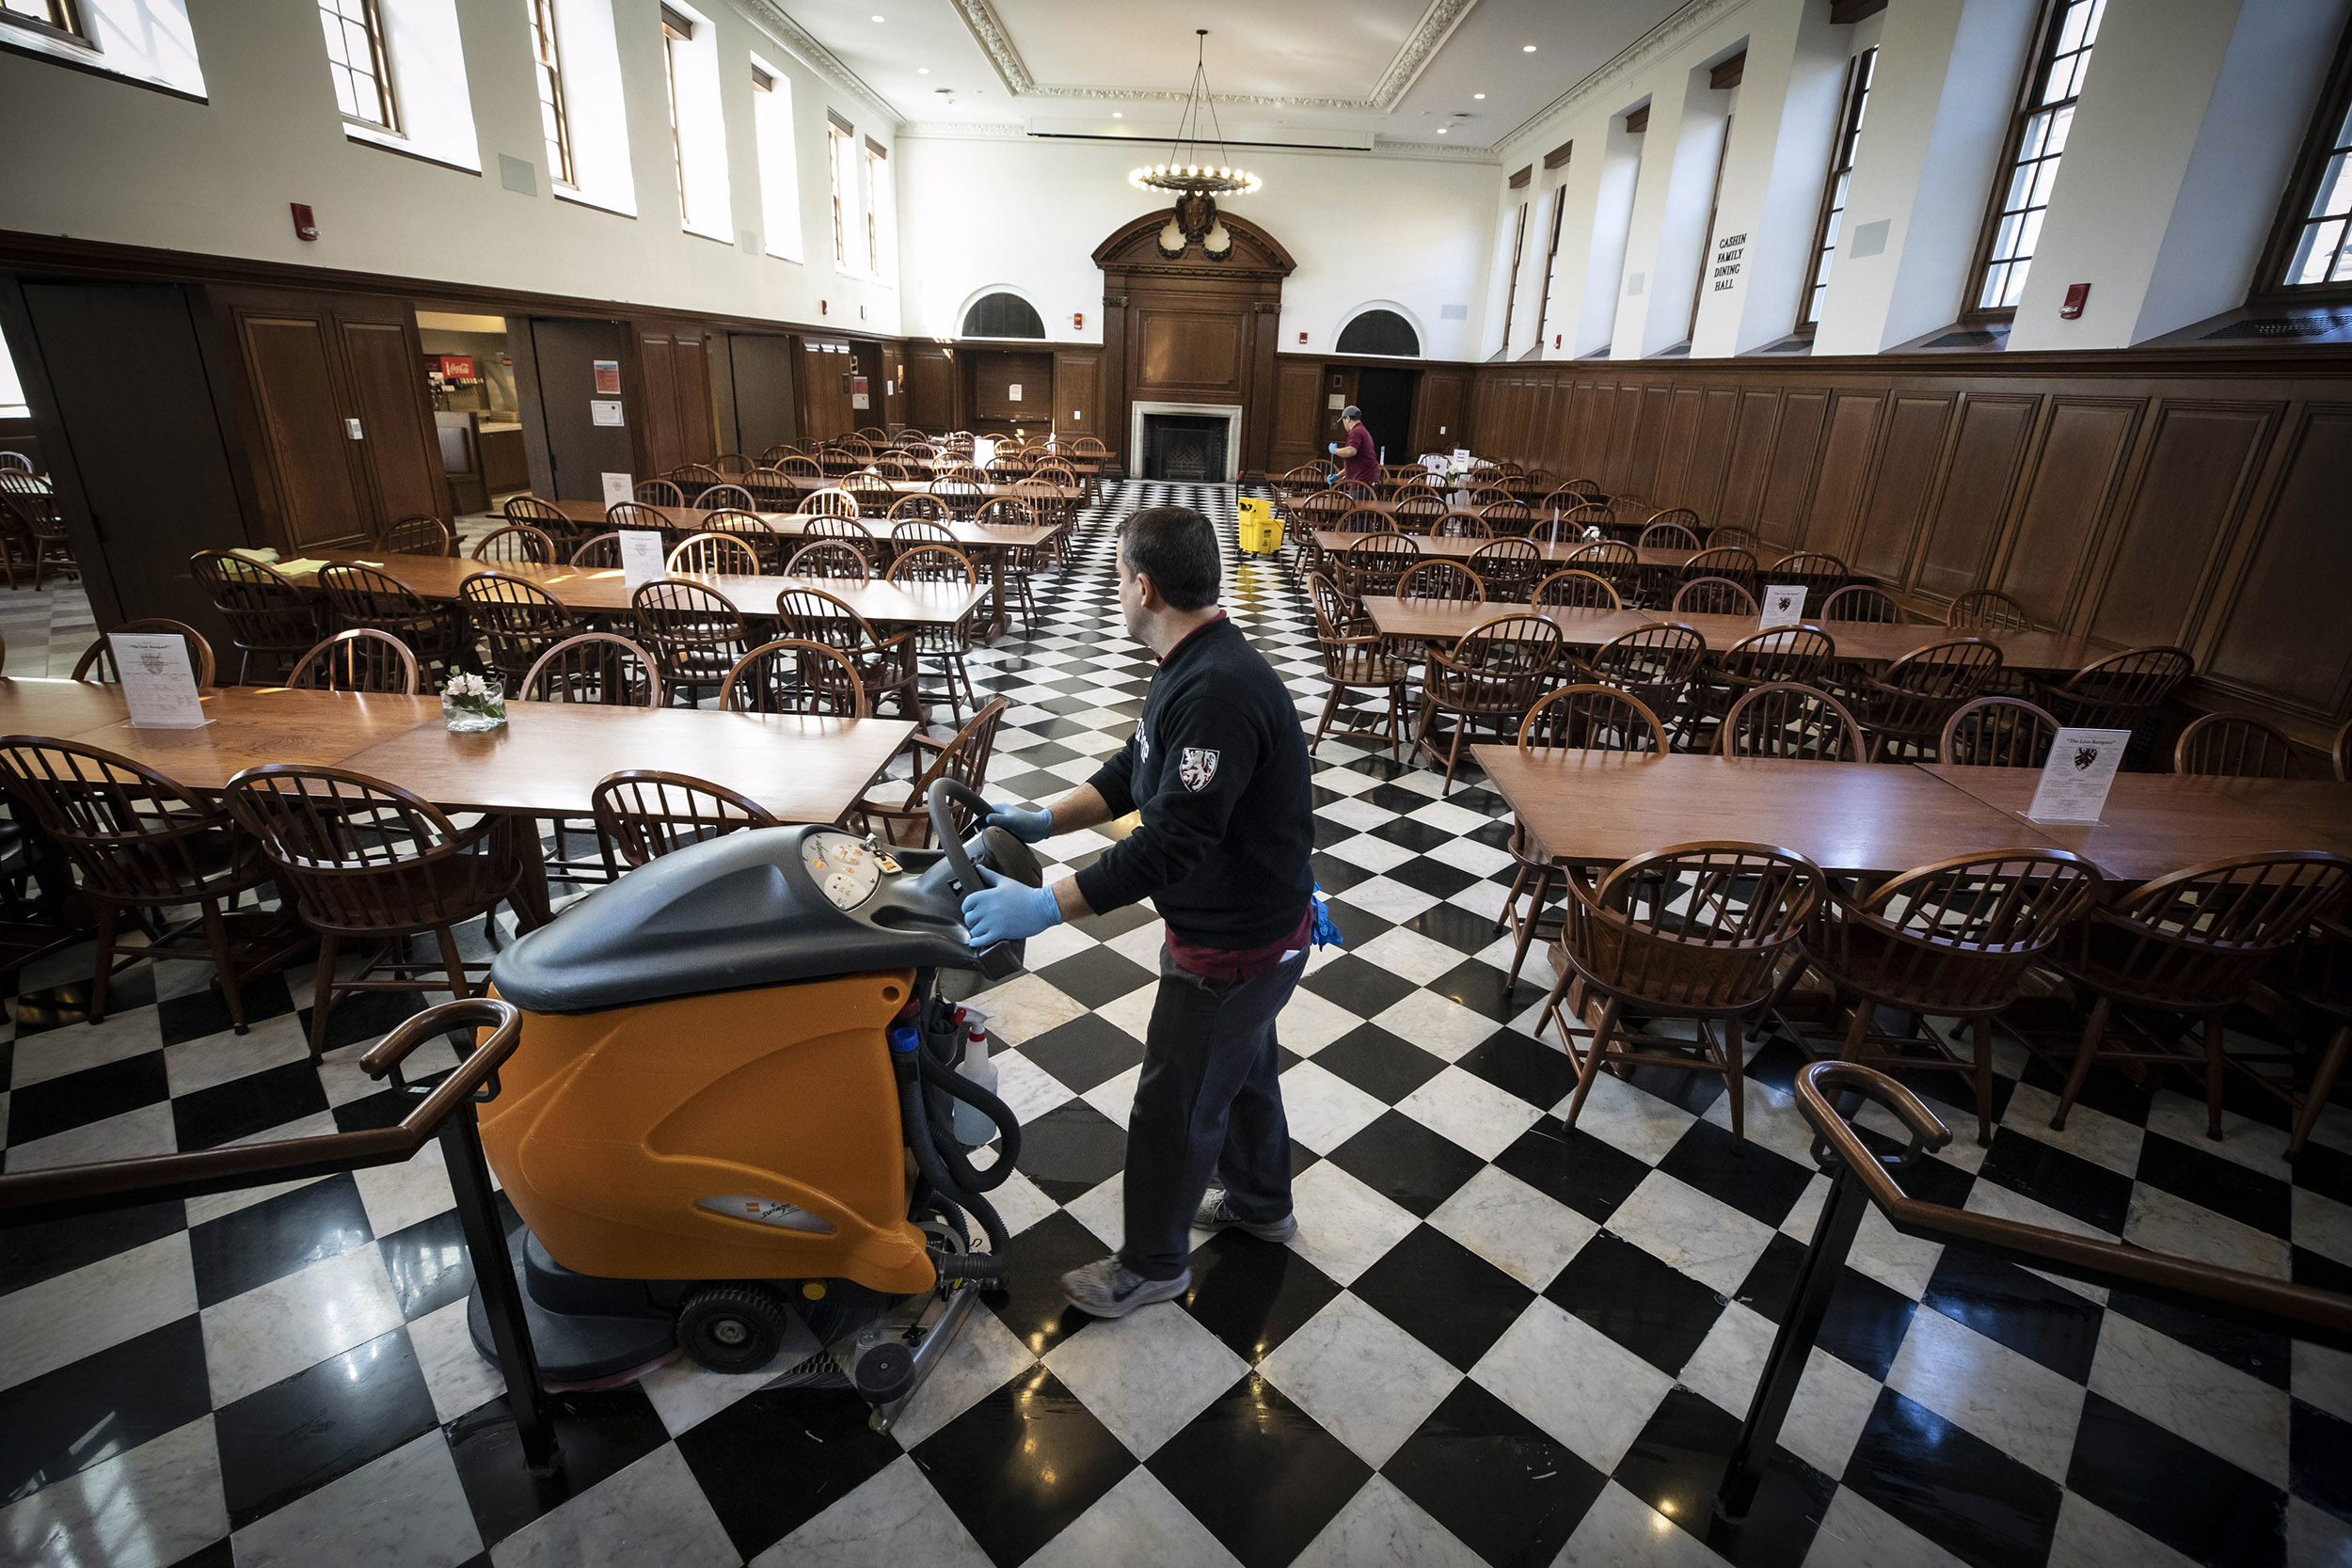 Custodian cleaning dining room.